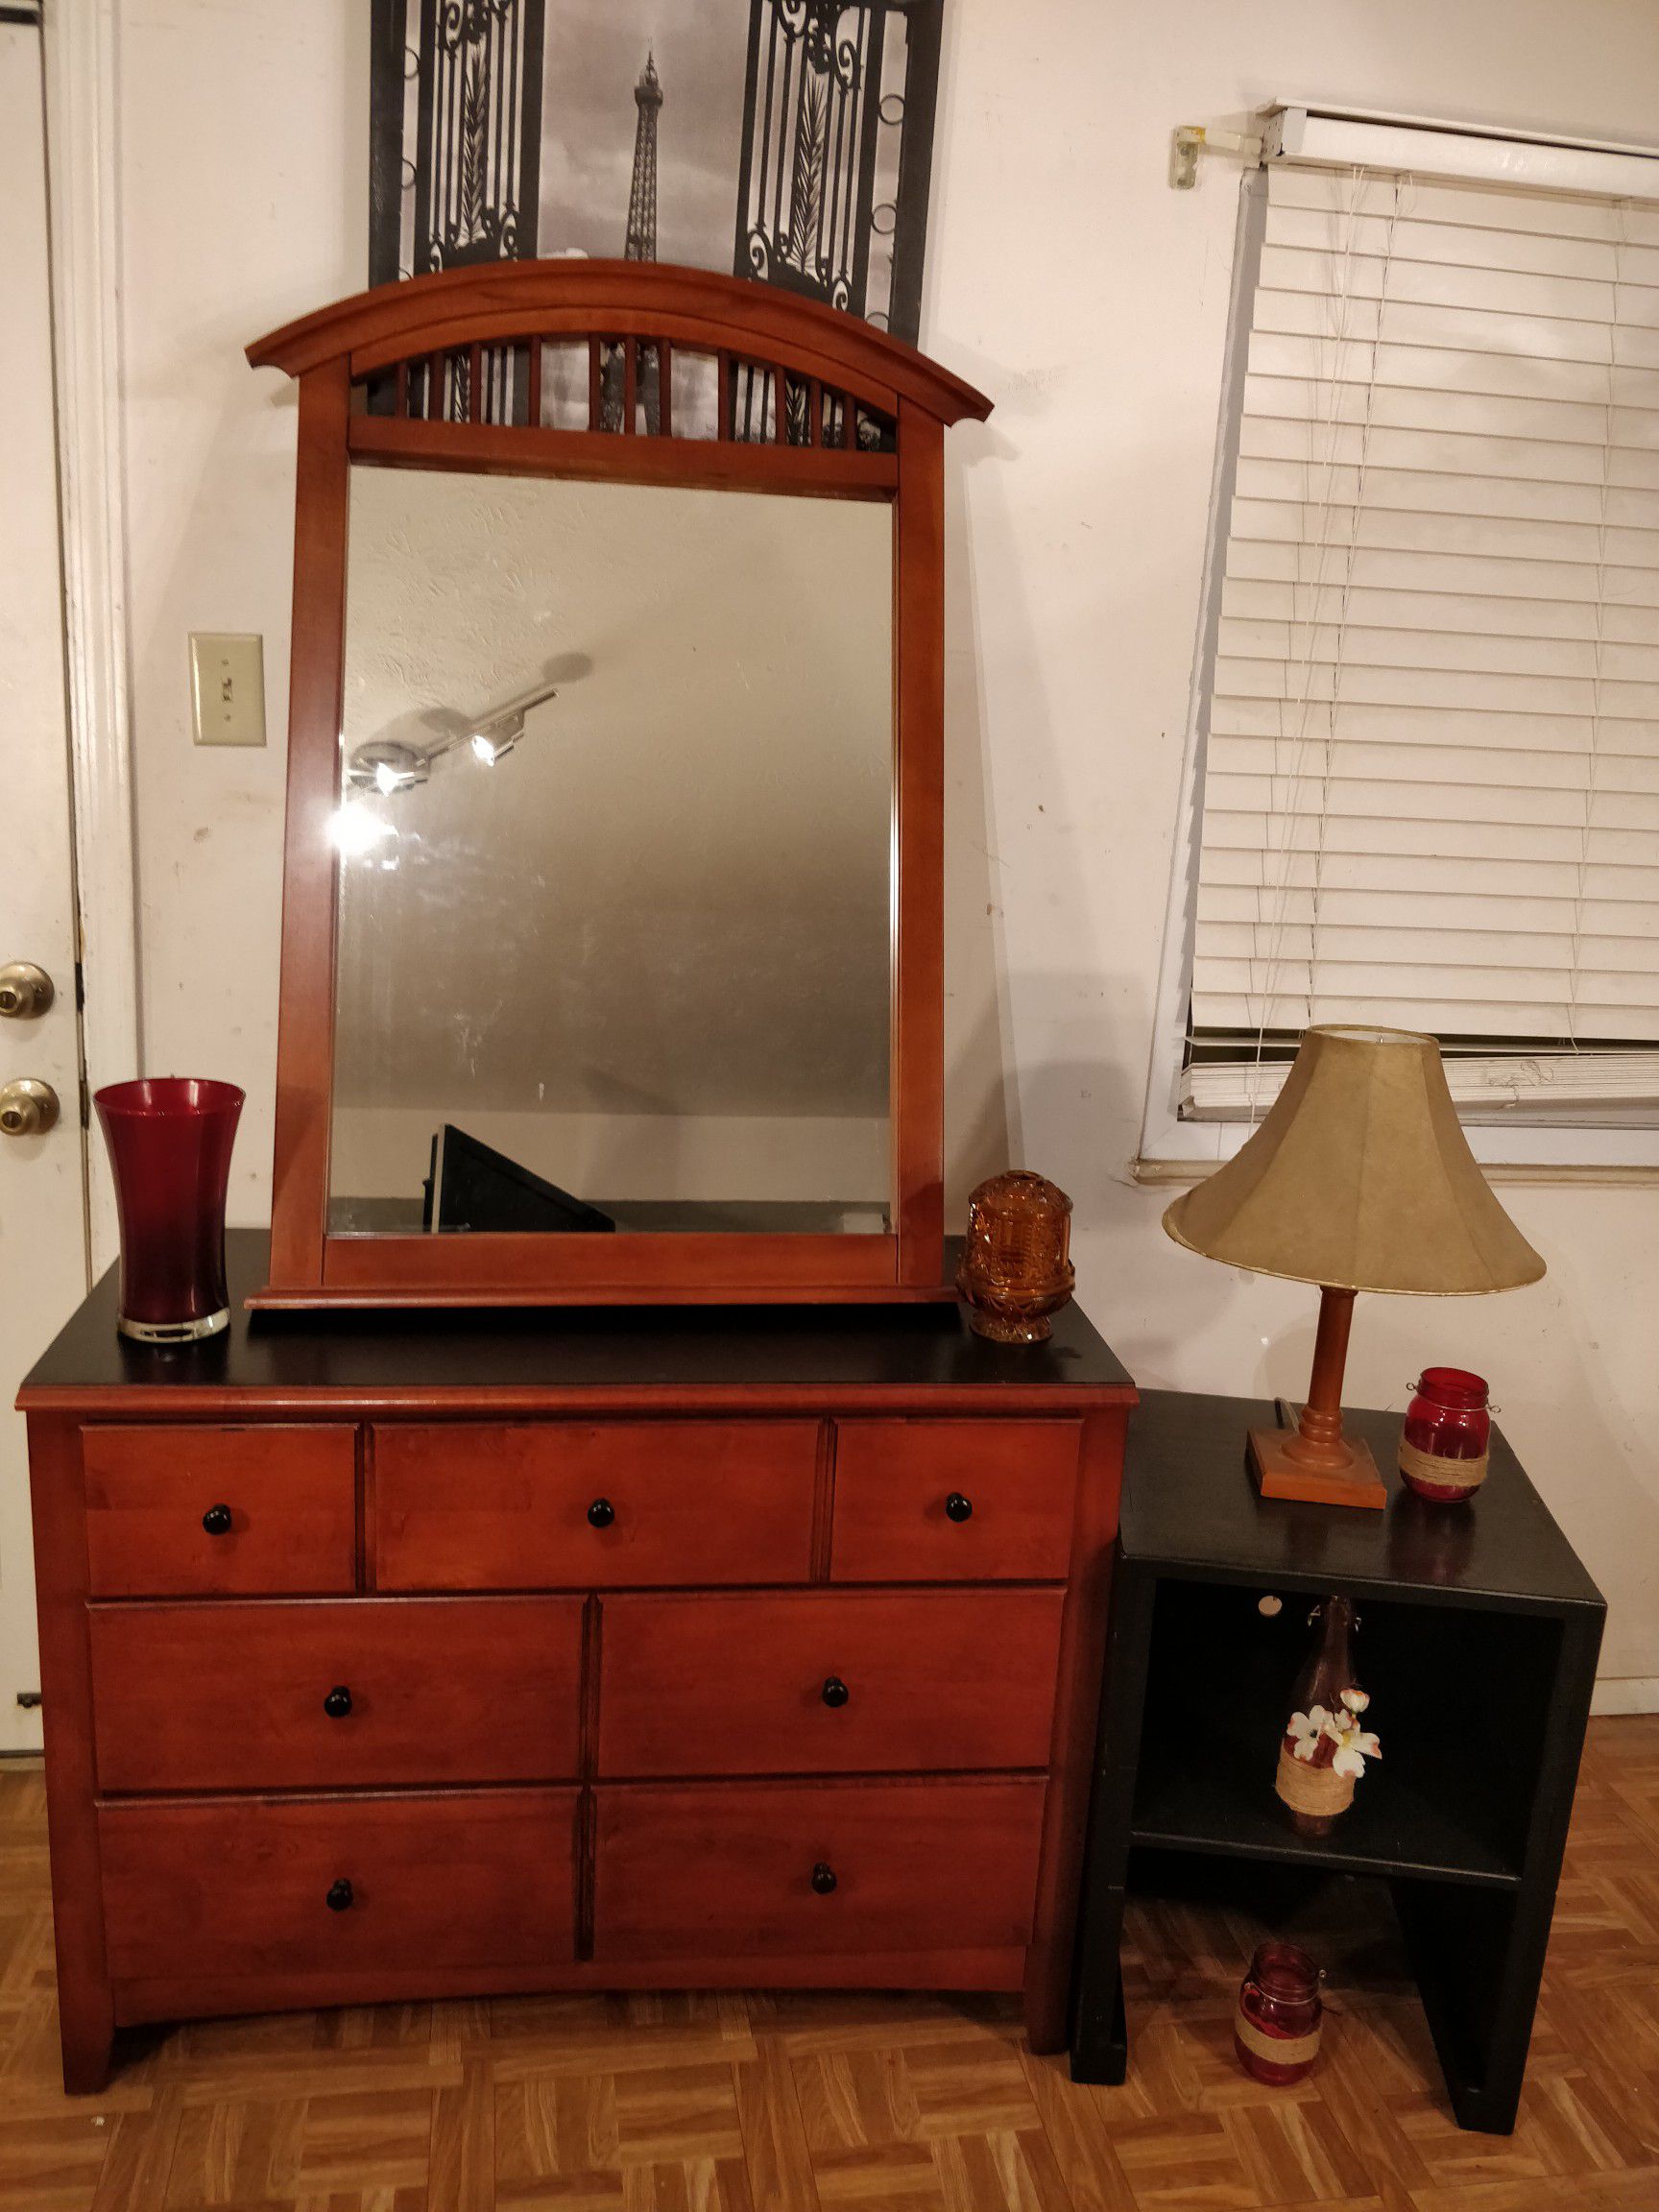 Nice wooden dresser with mirror/ TV stand & side table in good condition, made in USA, all big drawers working well. L40"*W18"*H30.3"